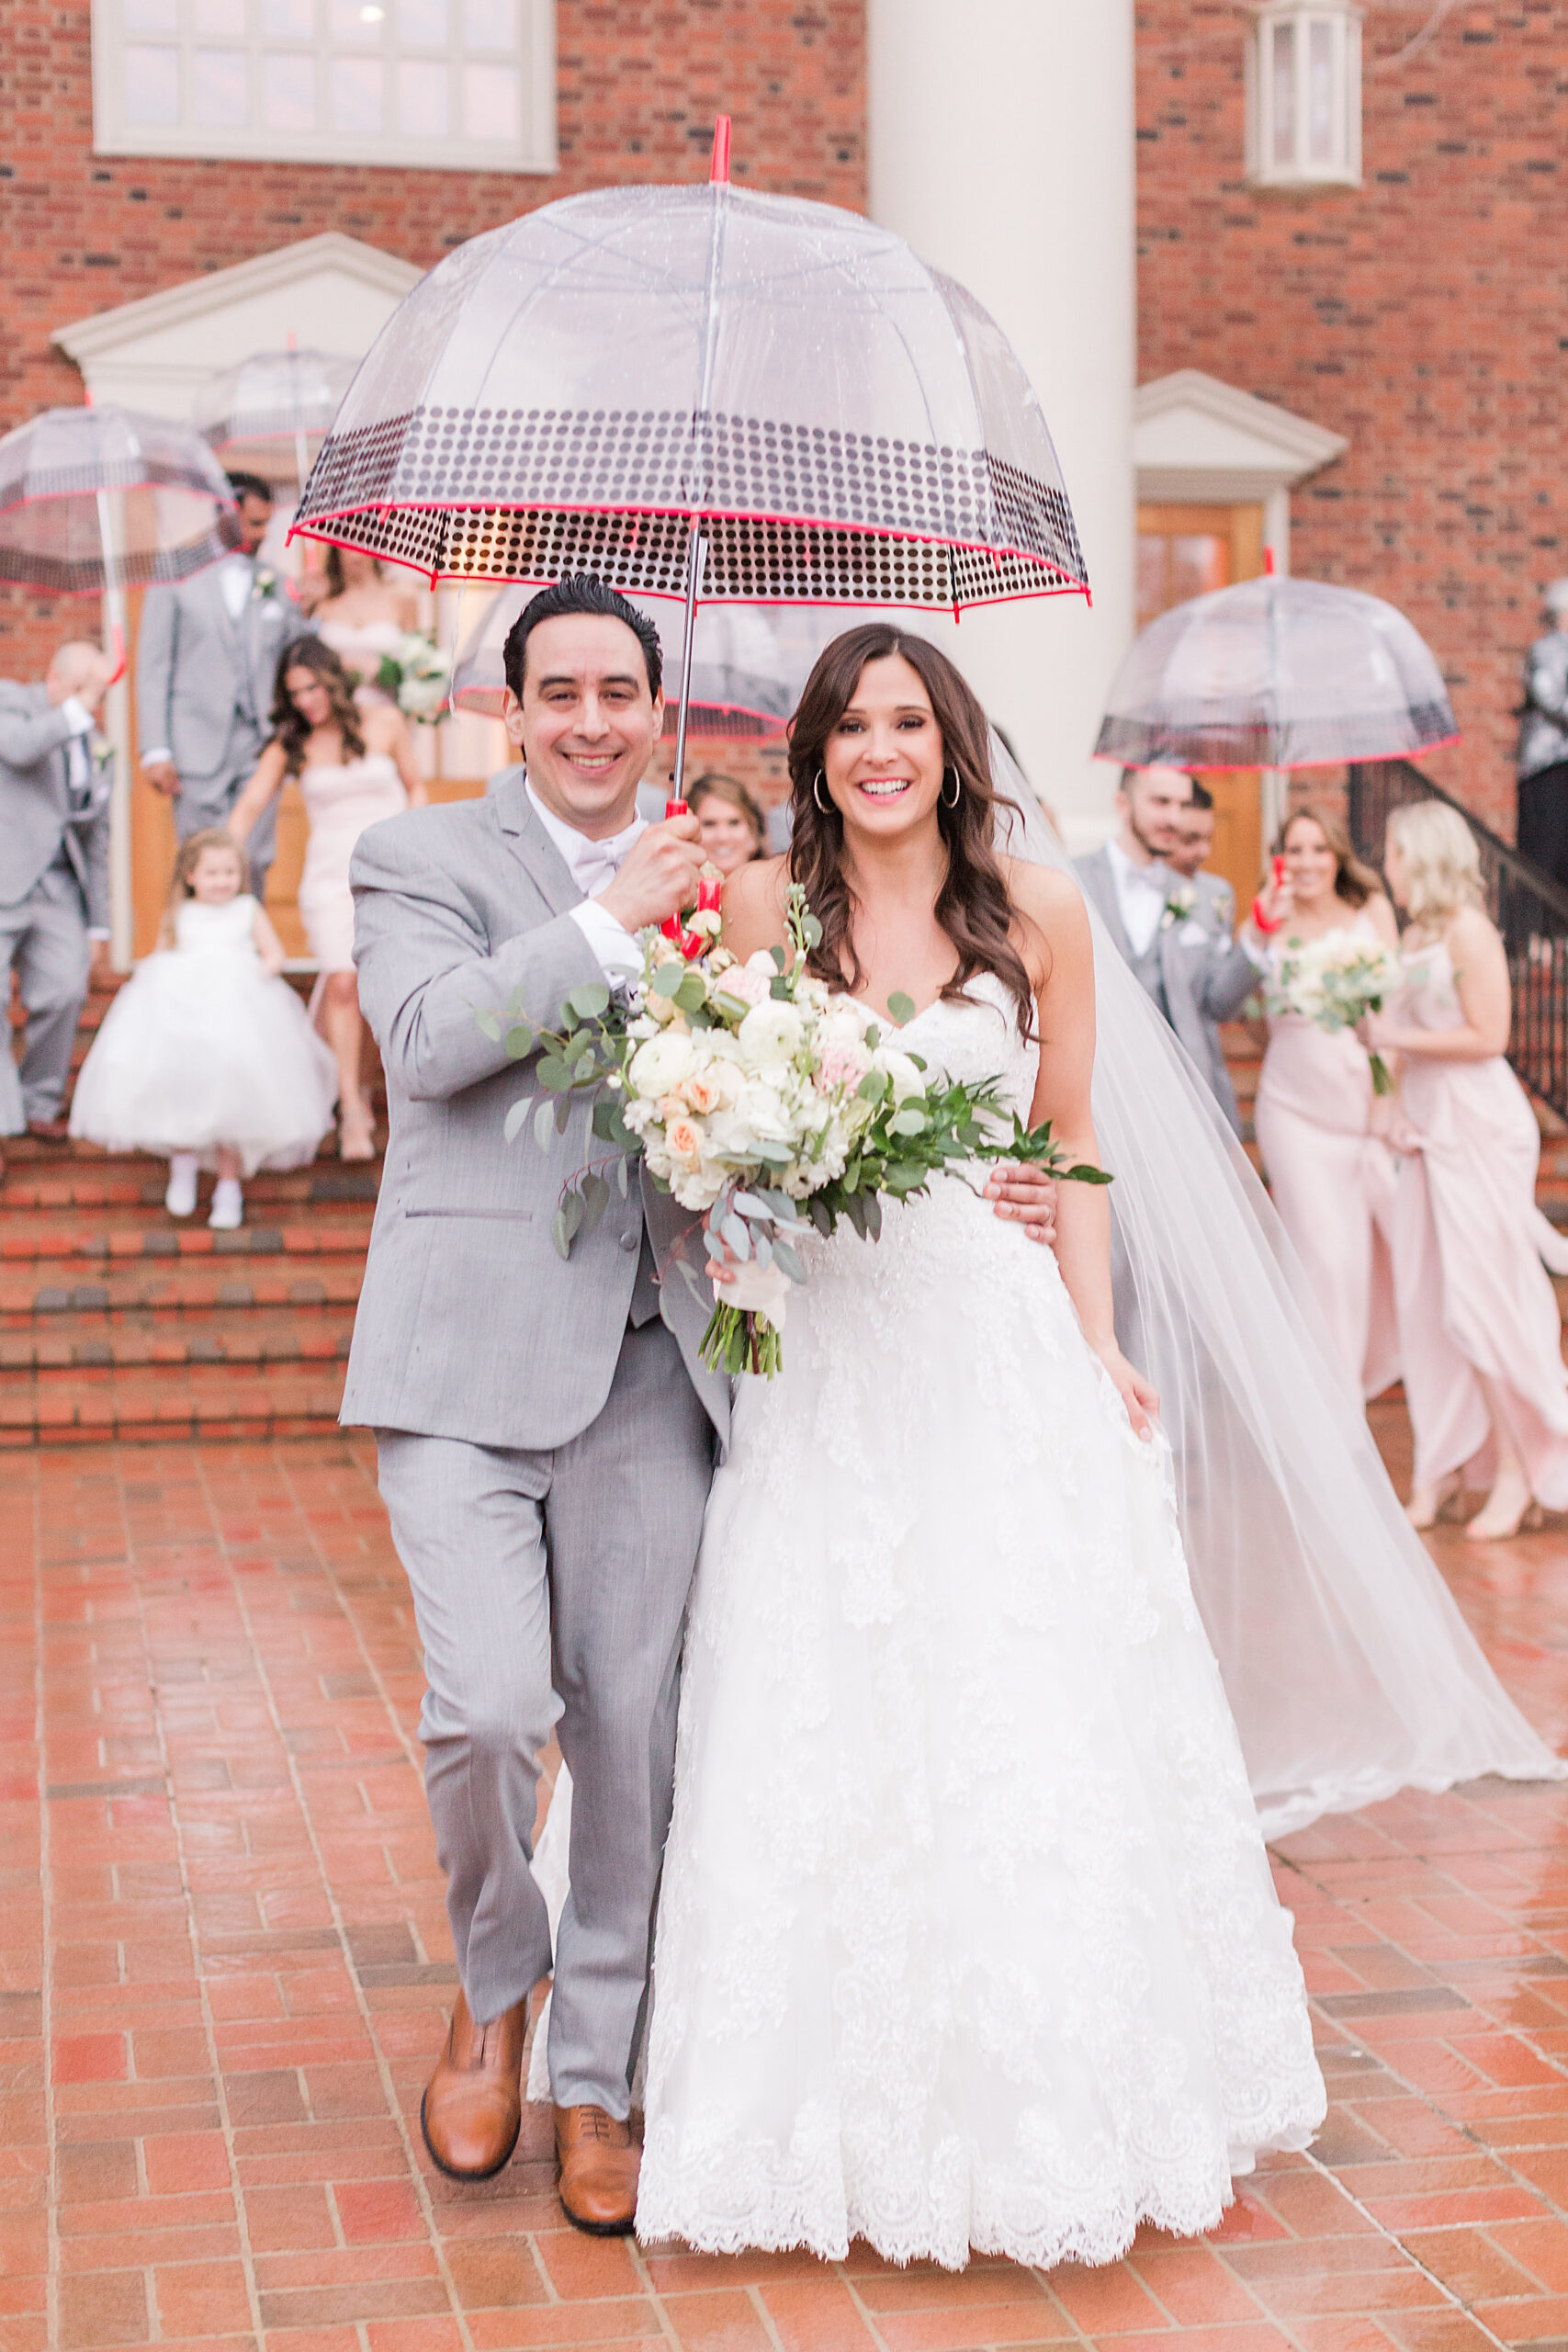  A couple rain showers weren’t going to put a damper on Amy and AC’s wedding day. 